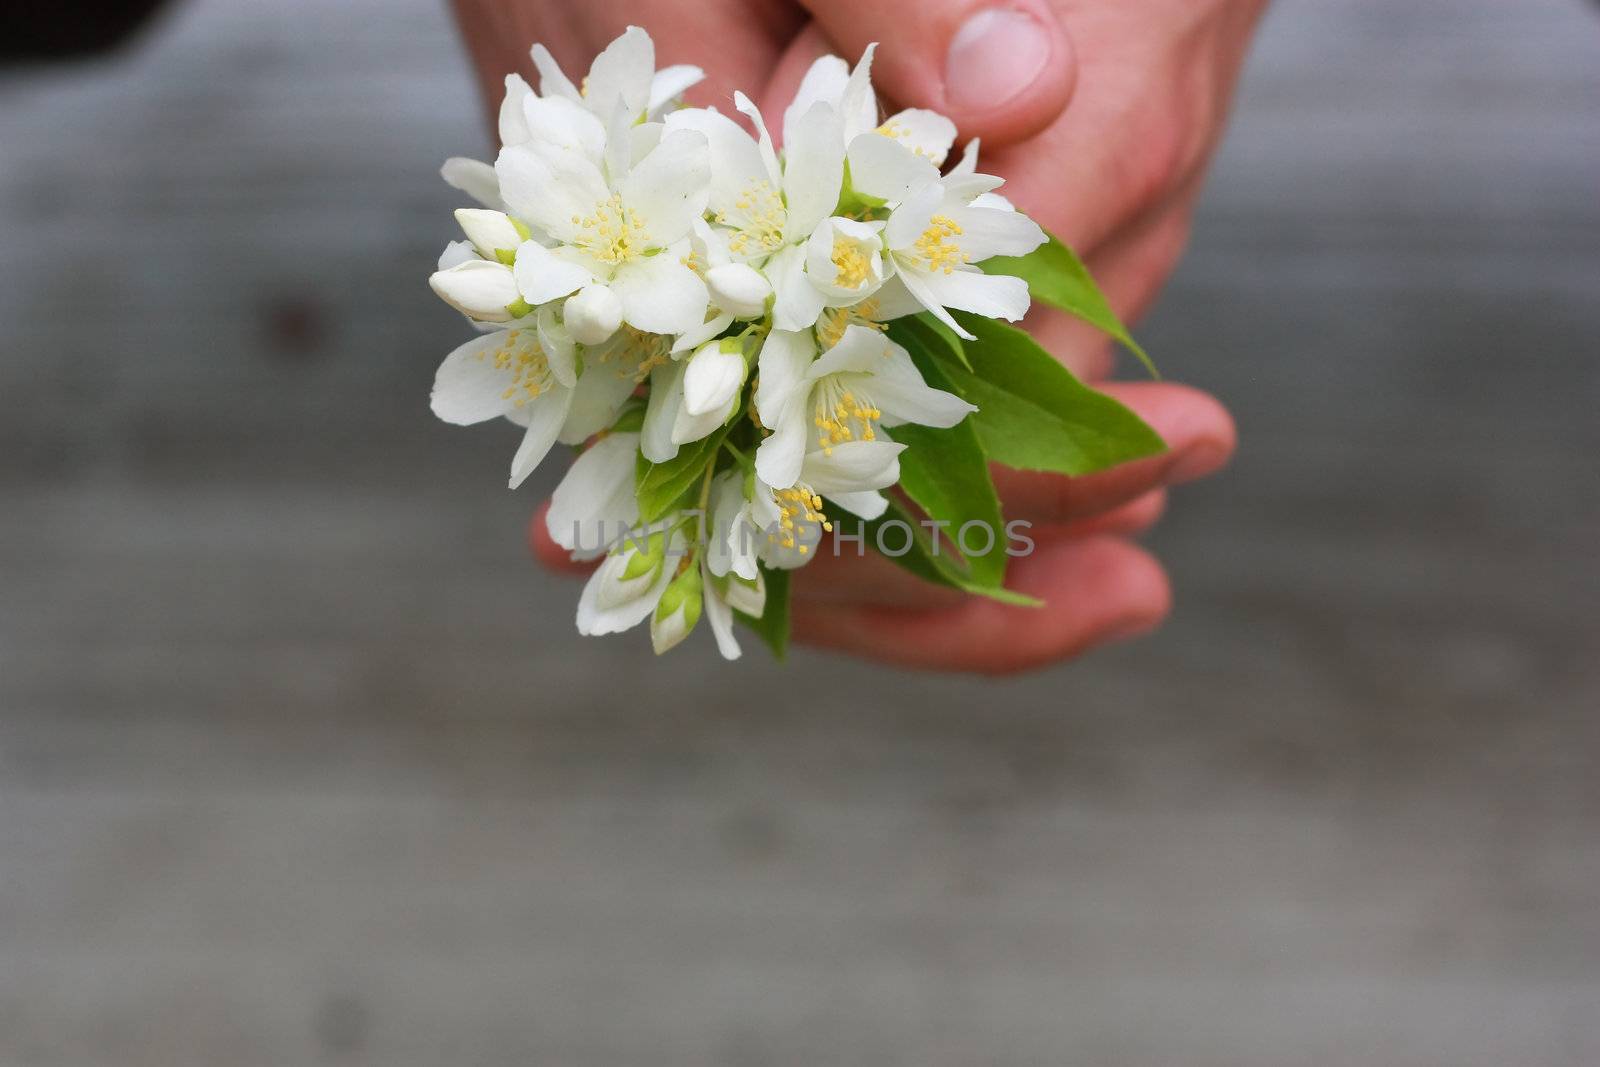 Bouquet of white flowers in man hands
